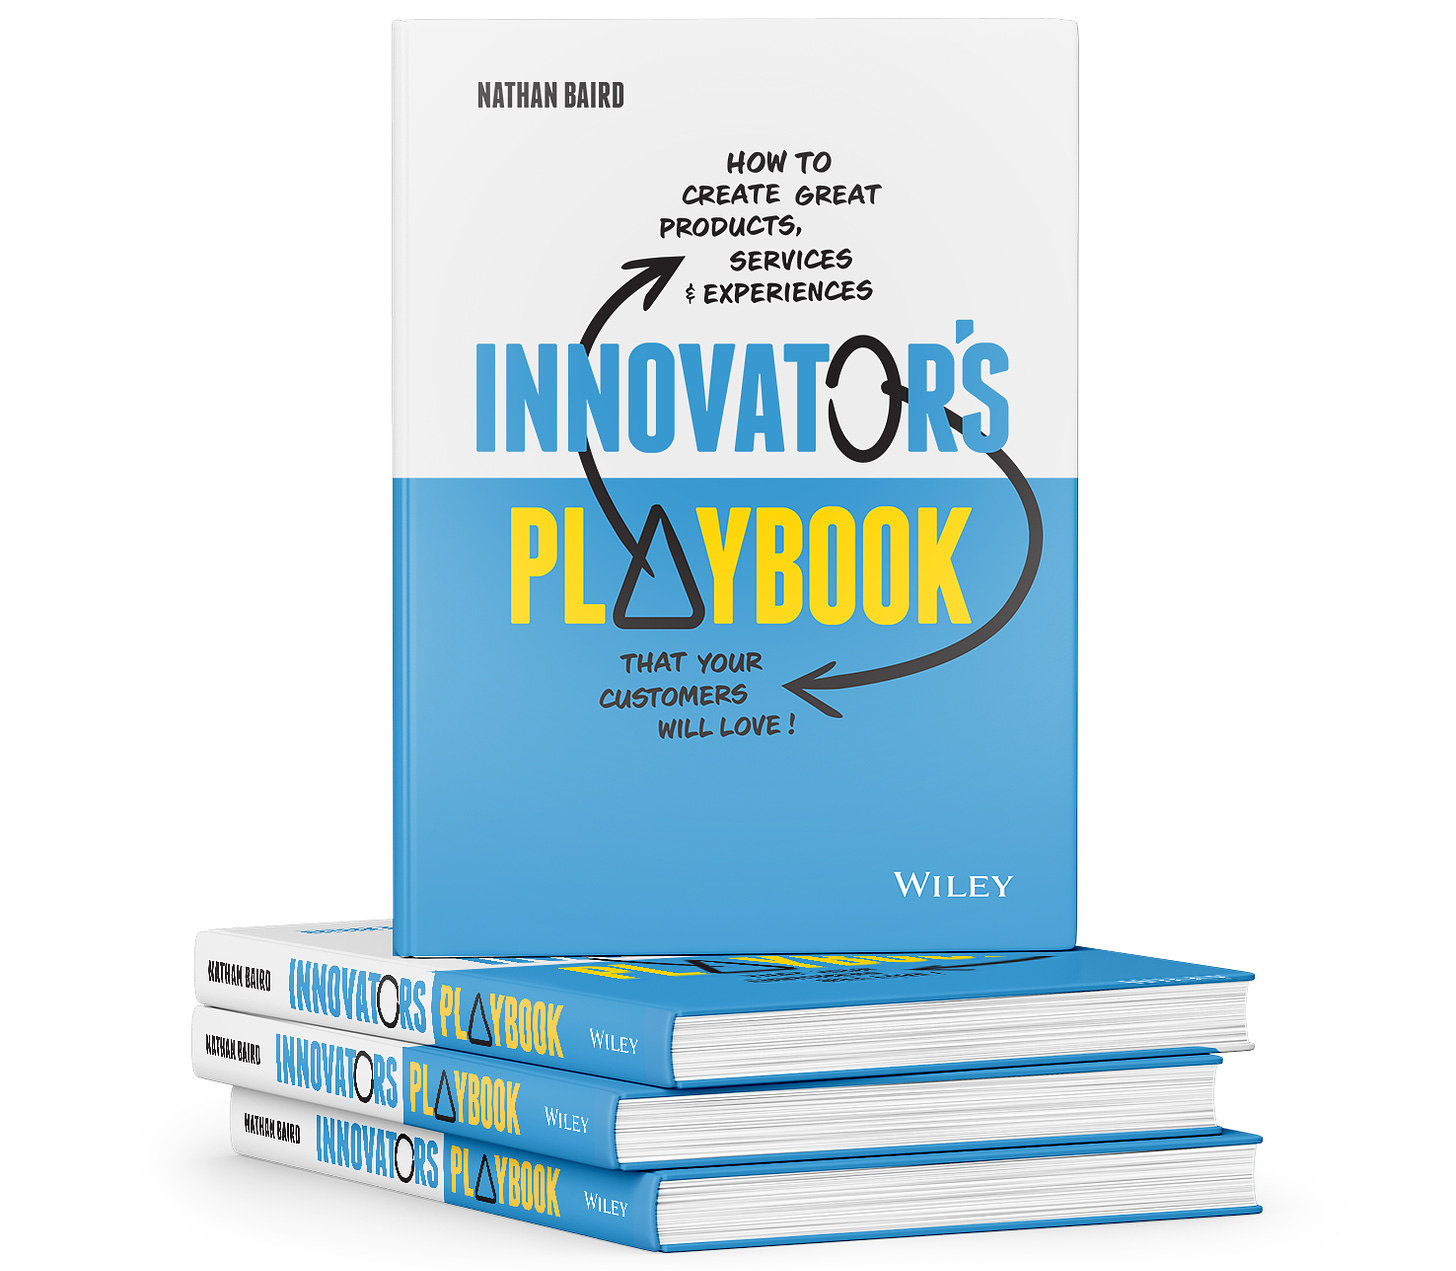 What is Product Innovation? Innovator's Playbook by Nathan Baird